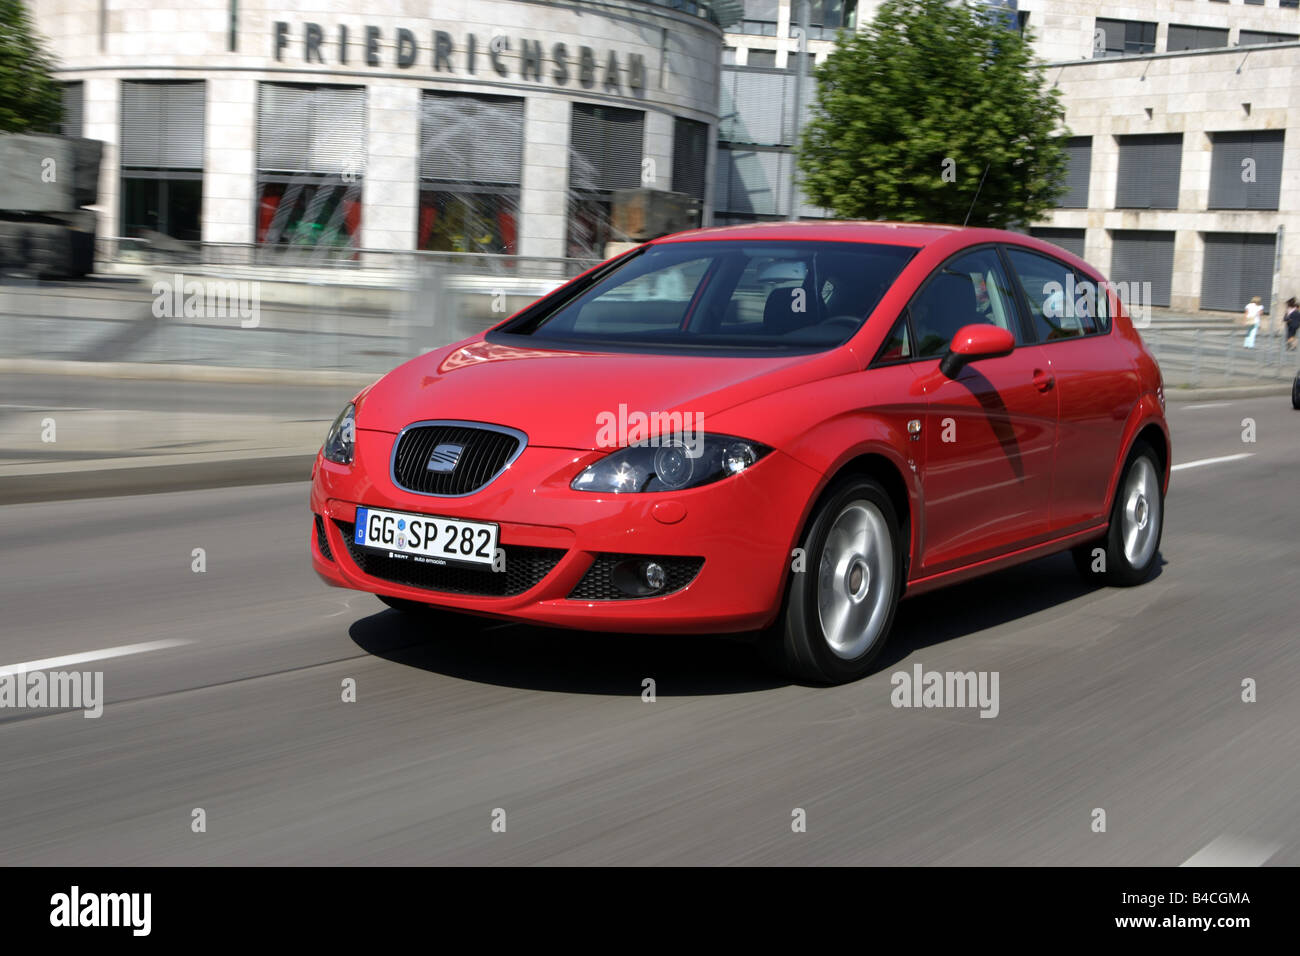 Seat Leon 2.0 FSI, model year 2005-, red, driving, diagonal from the front,  frontal view, City Stock Photo - Alamy